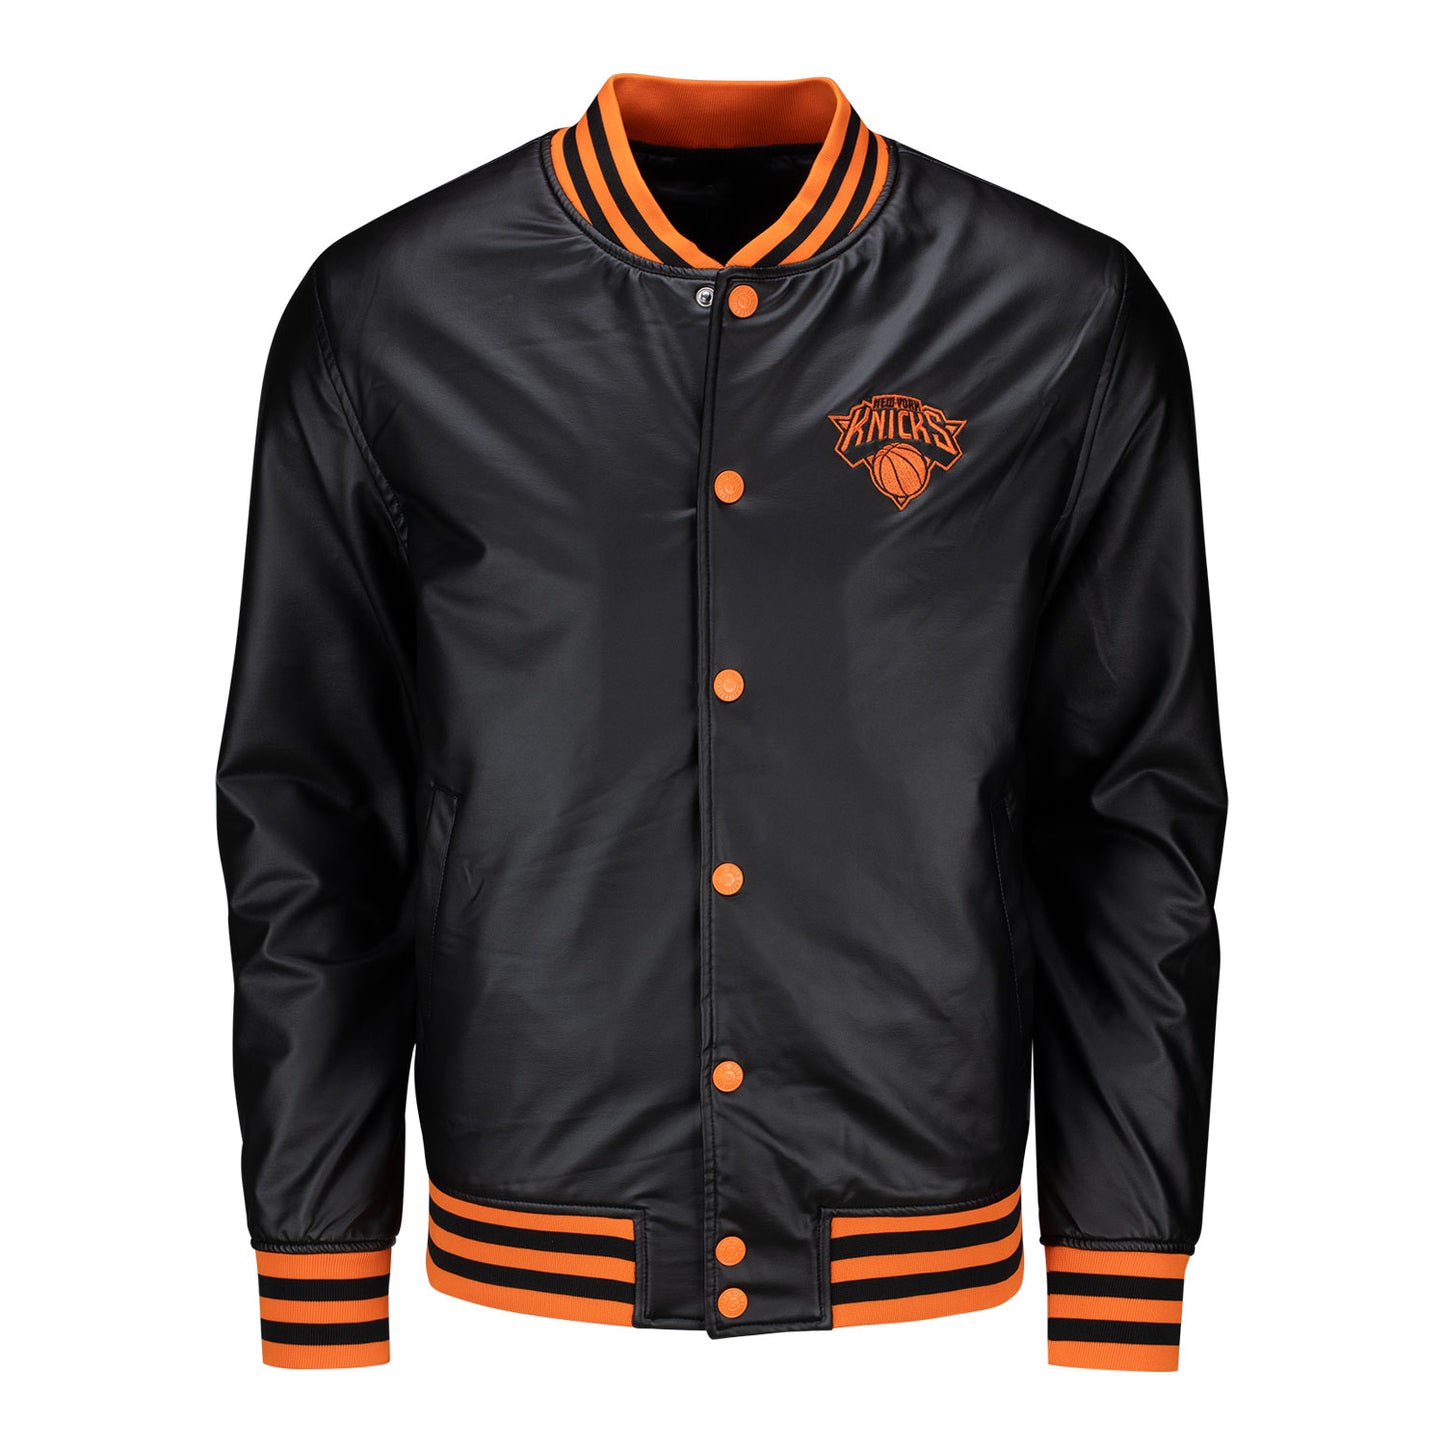 Wild Collective Knicks Metallic Bomber Jacket - Front View